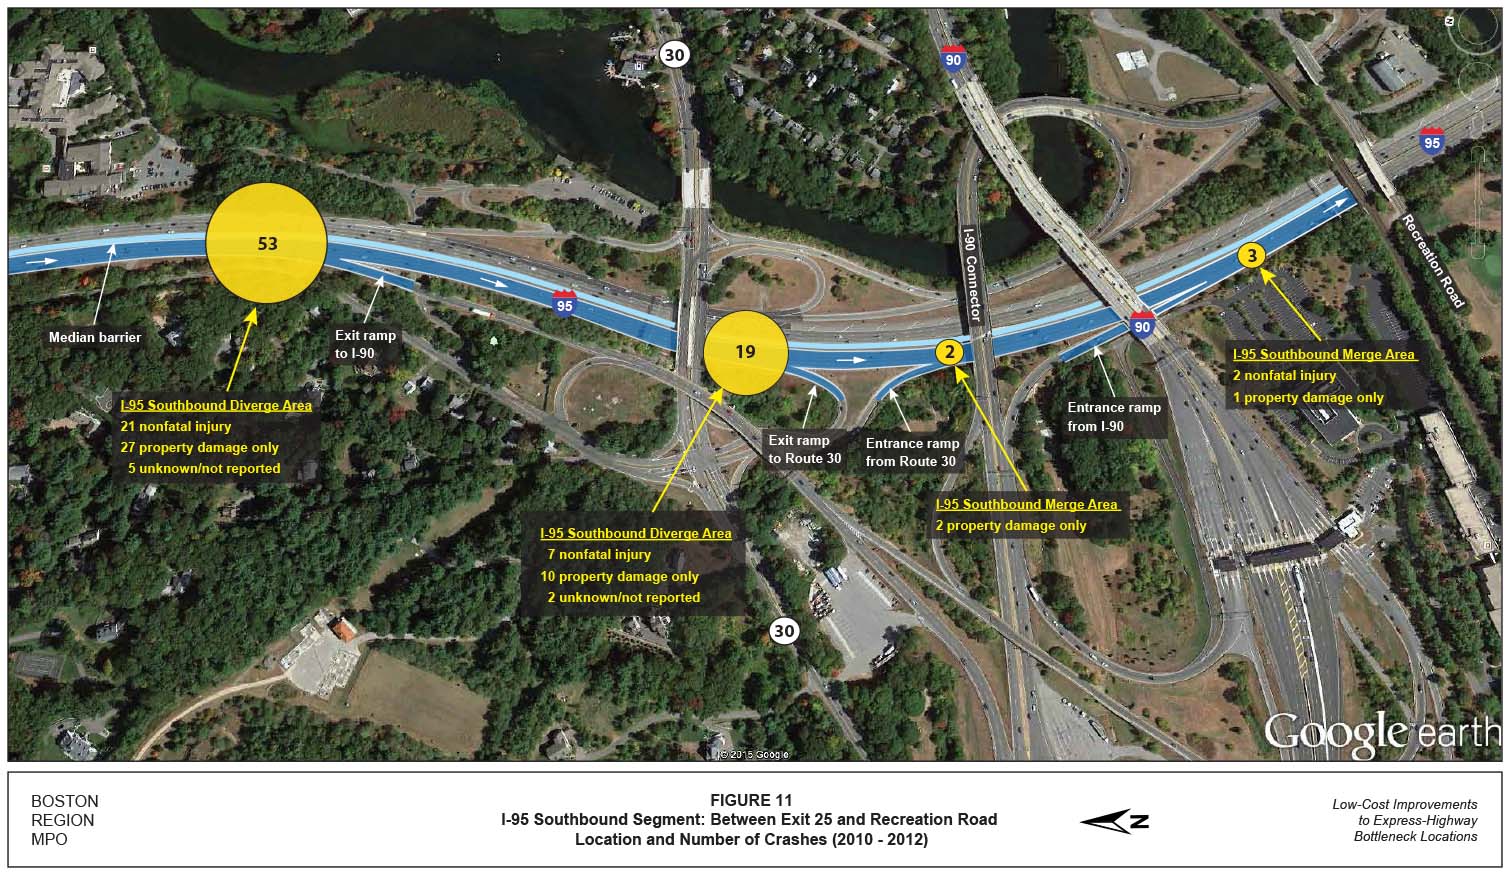 FIGURE 11 Aerial-view map showing the location and number of crashes for the I-95 southbound segment between Exit 25 and Recreation Road from 2010 to 2012